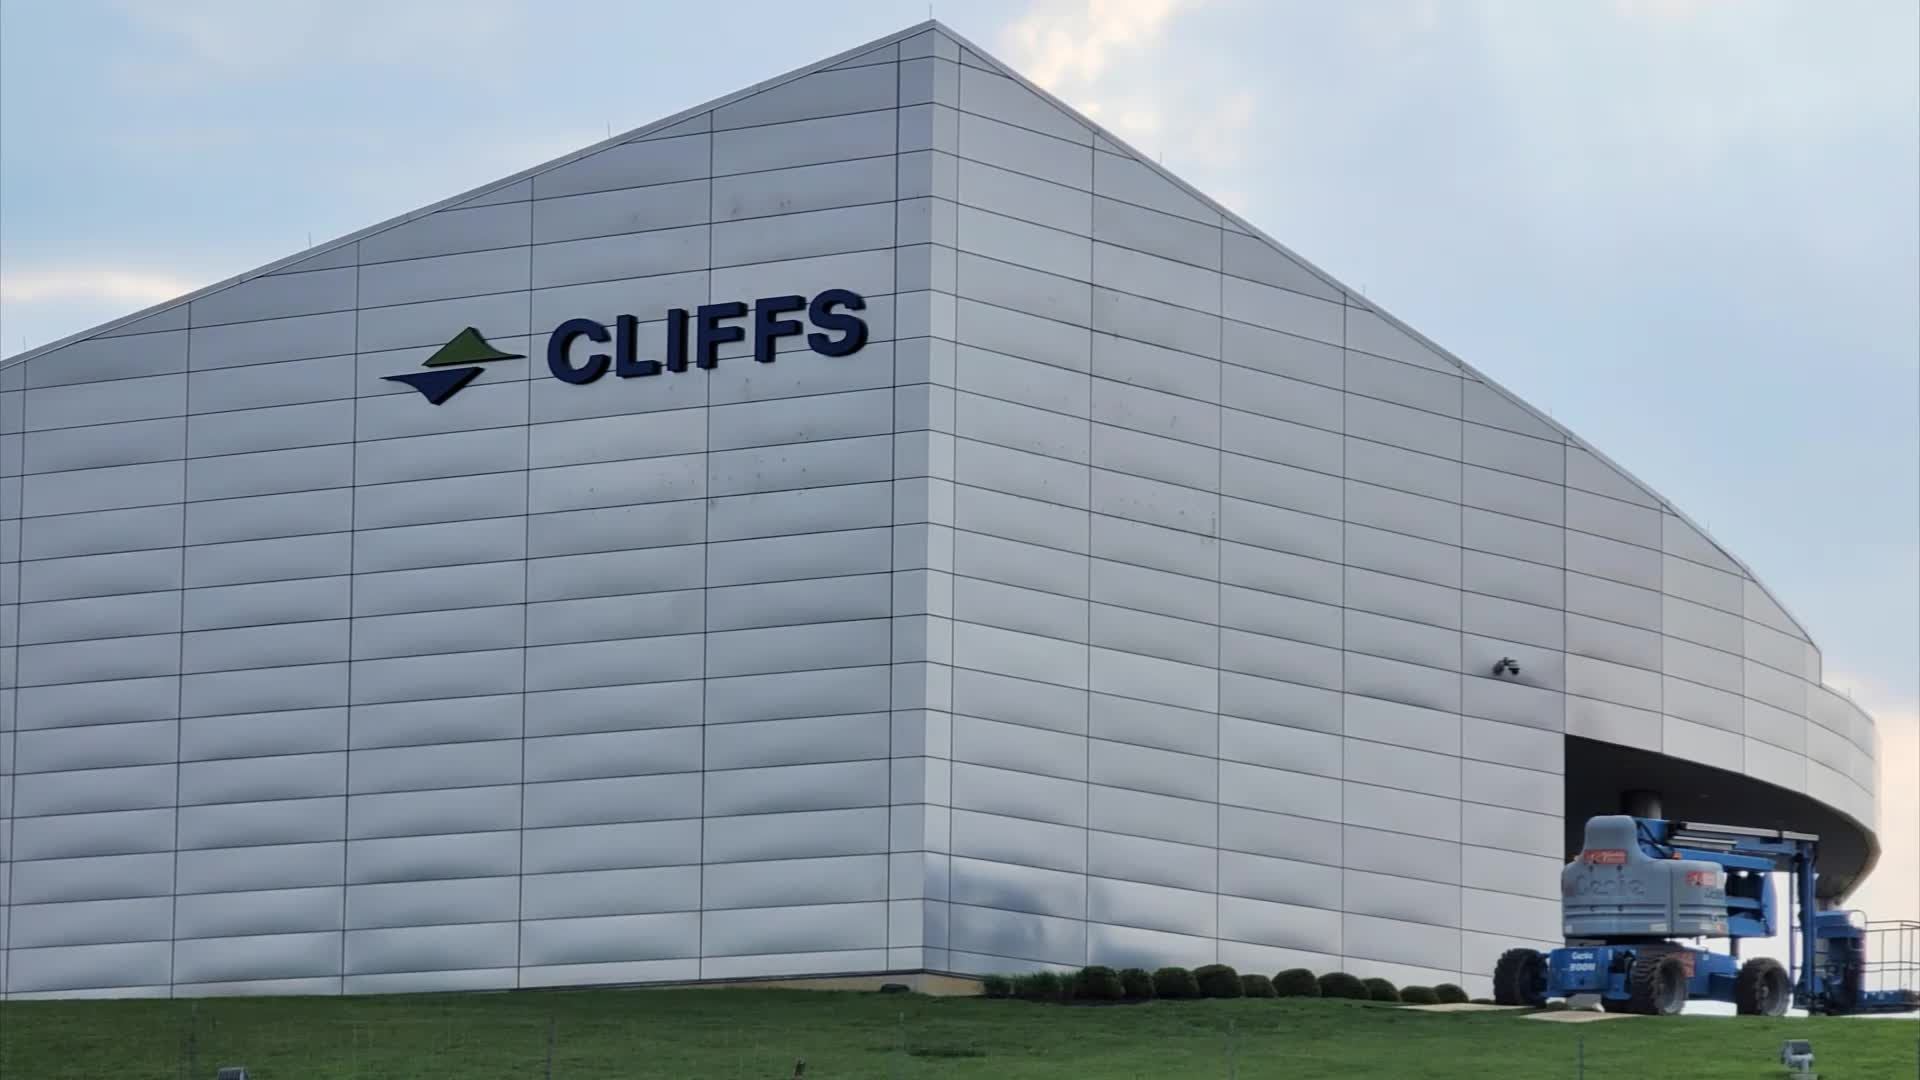 American Cliffs builds a line for the production of electrical steel